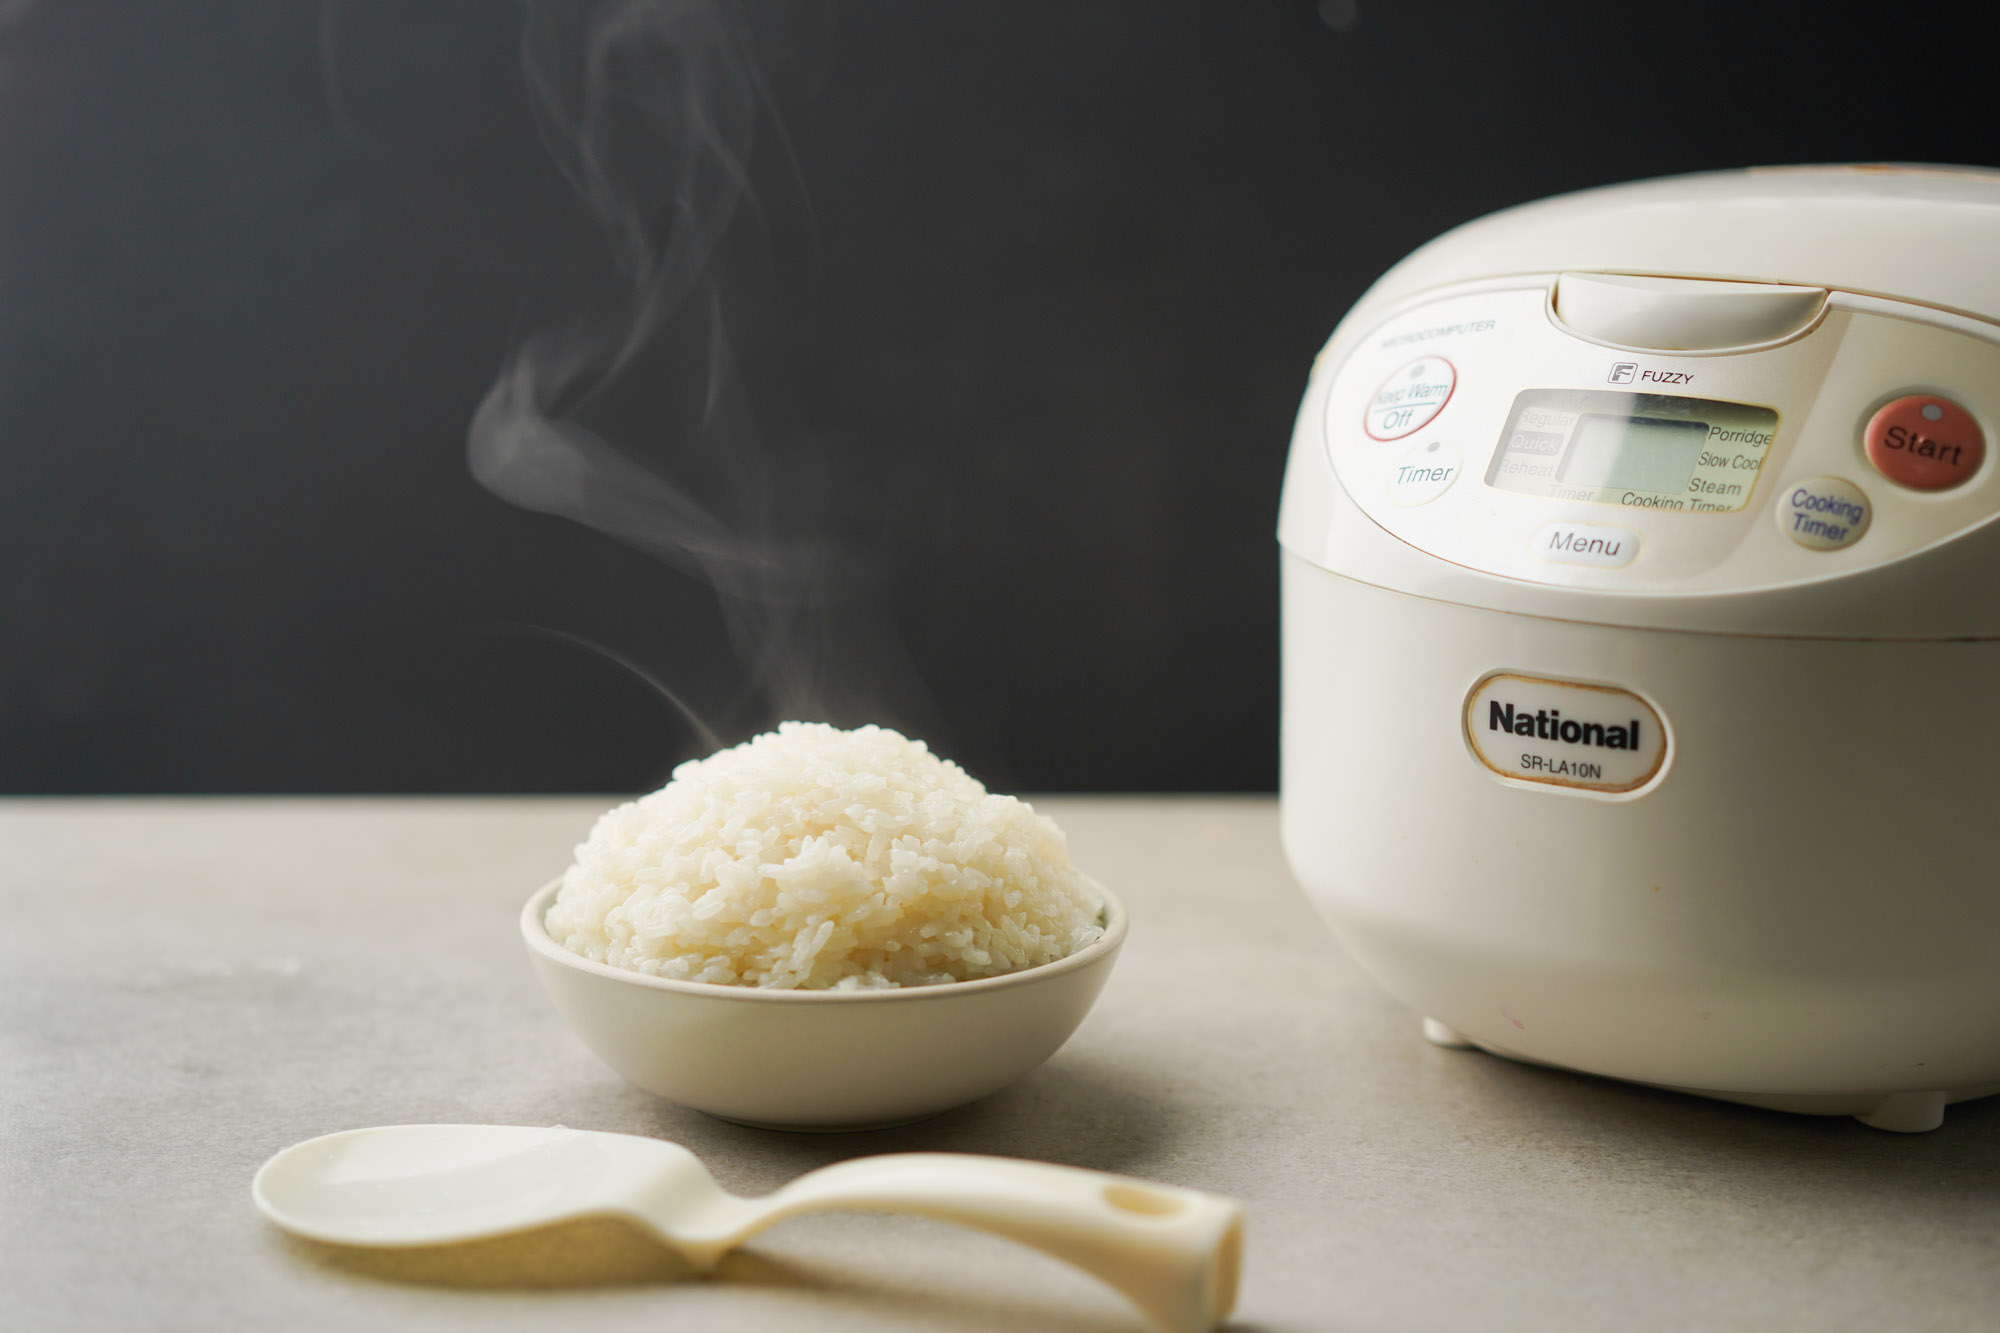 How to Use a Rice Cooker for Perfect Rice Every Time